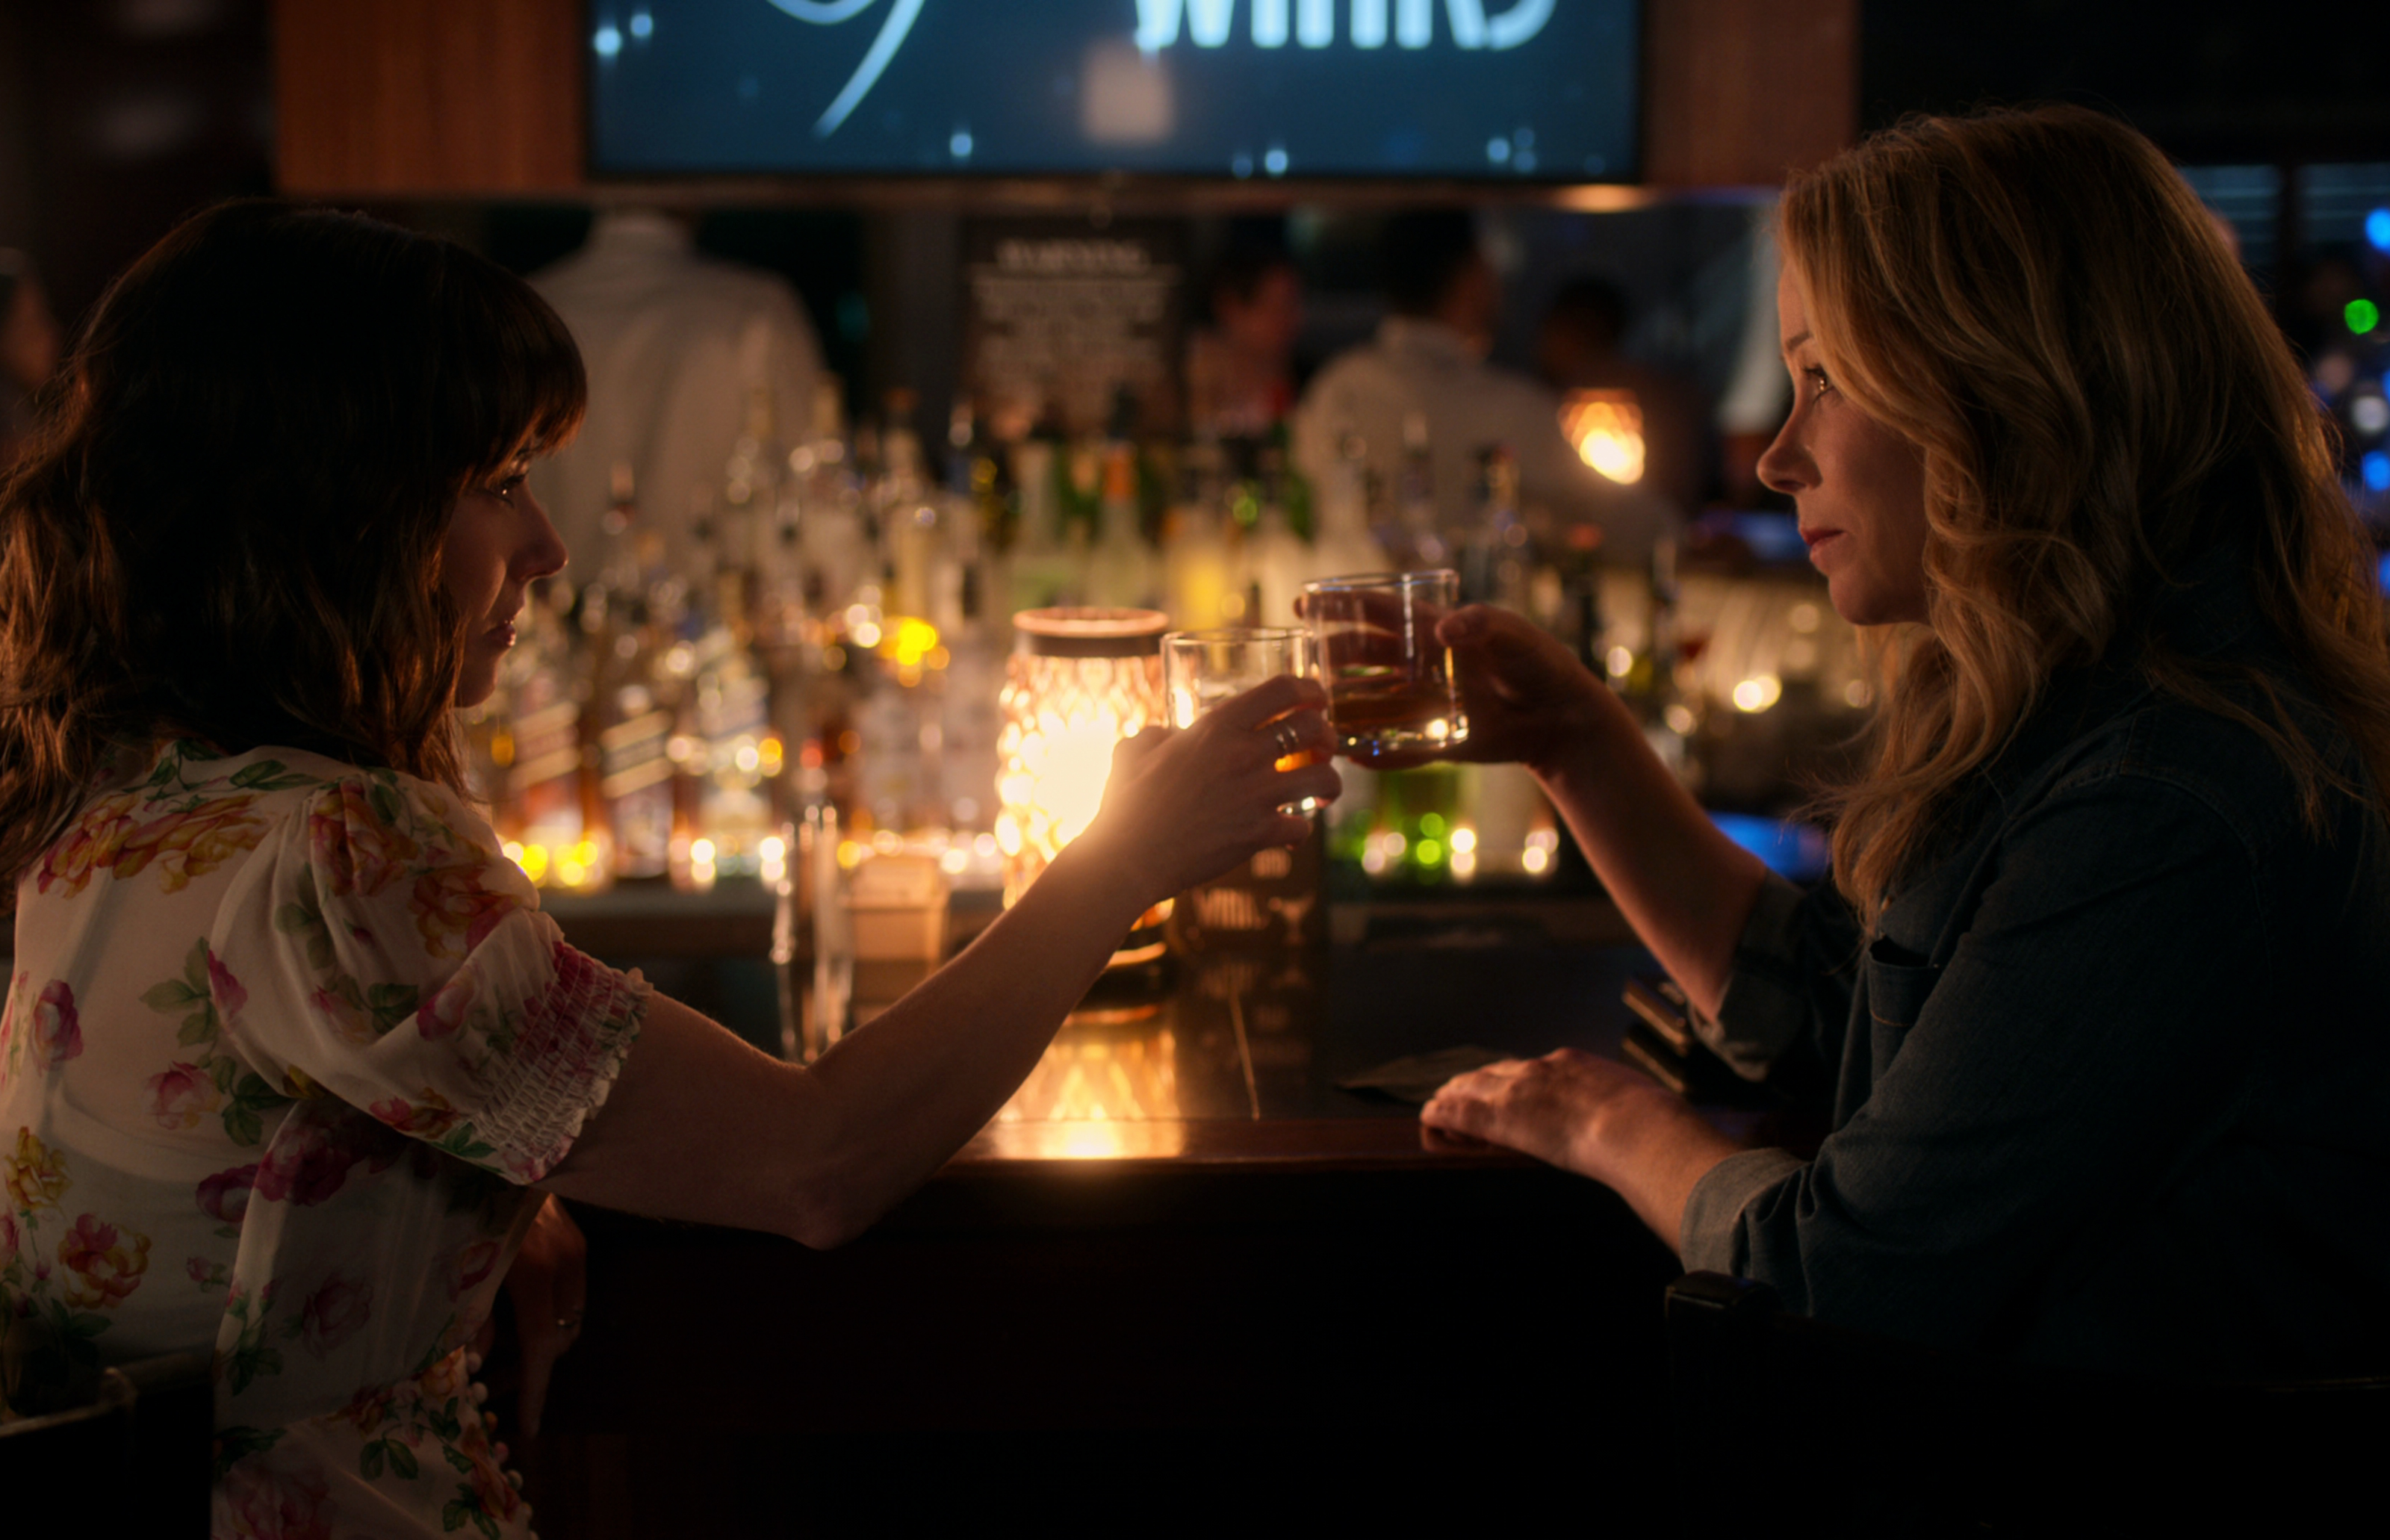 Dead to Me' Ending Explained: What Happens to Judy and Jen In